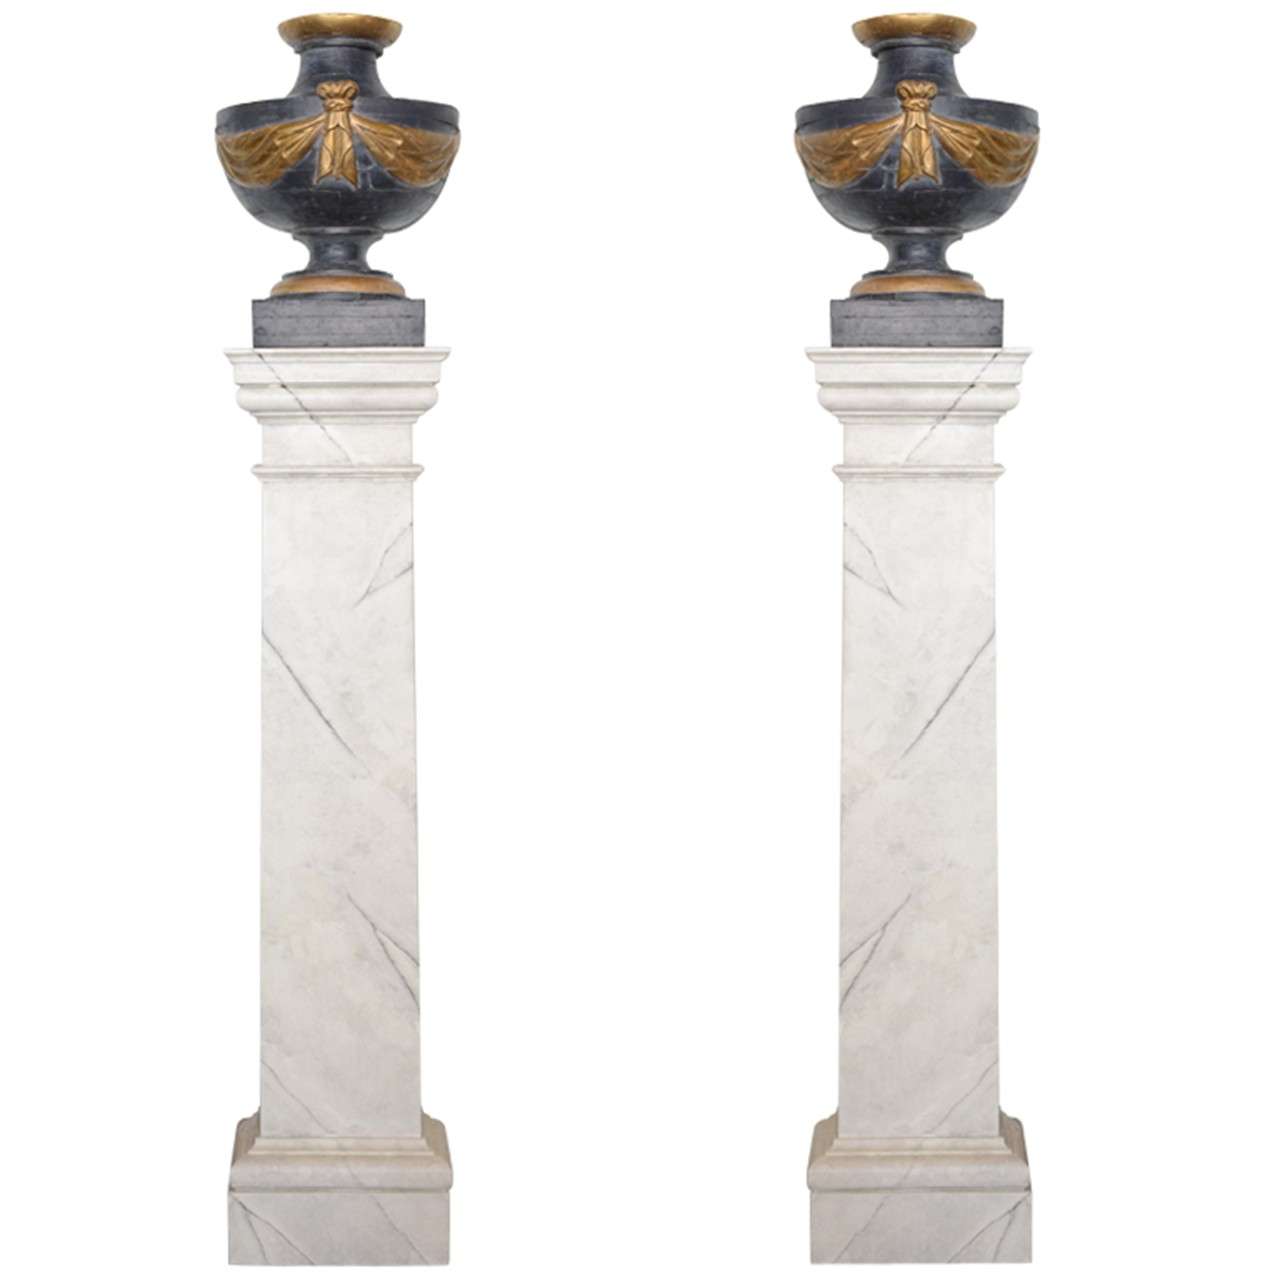 Pair of Italian Neoclassic Painted and Parcel-Gilt Urns on Pedestals